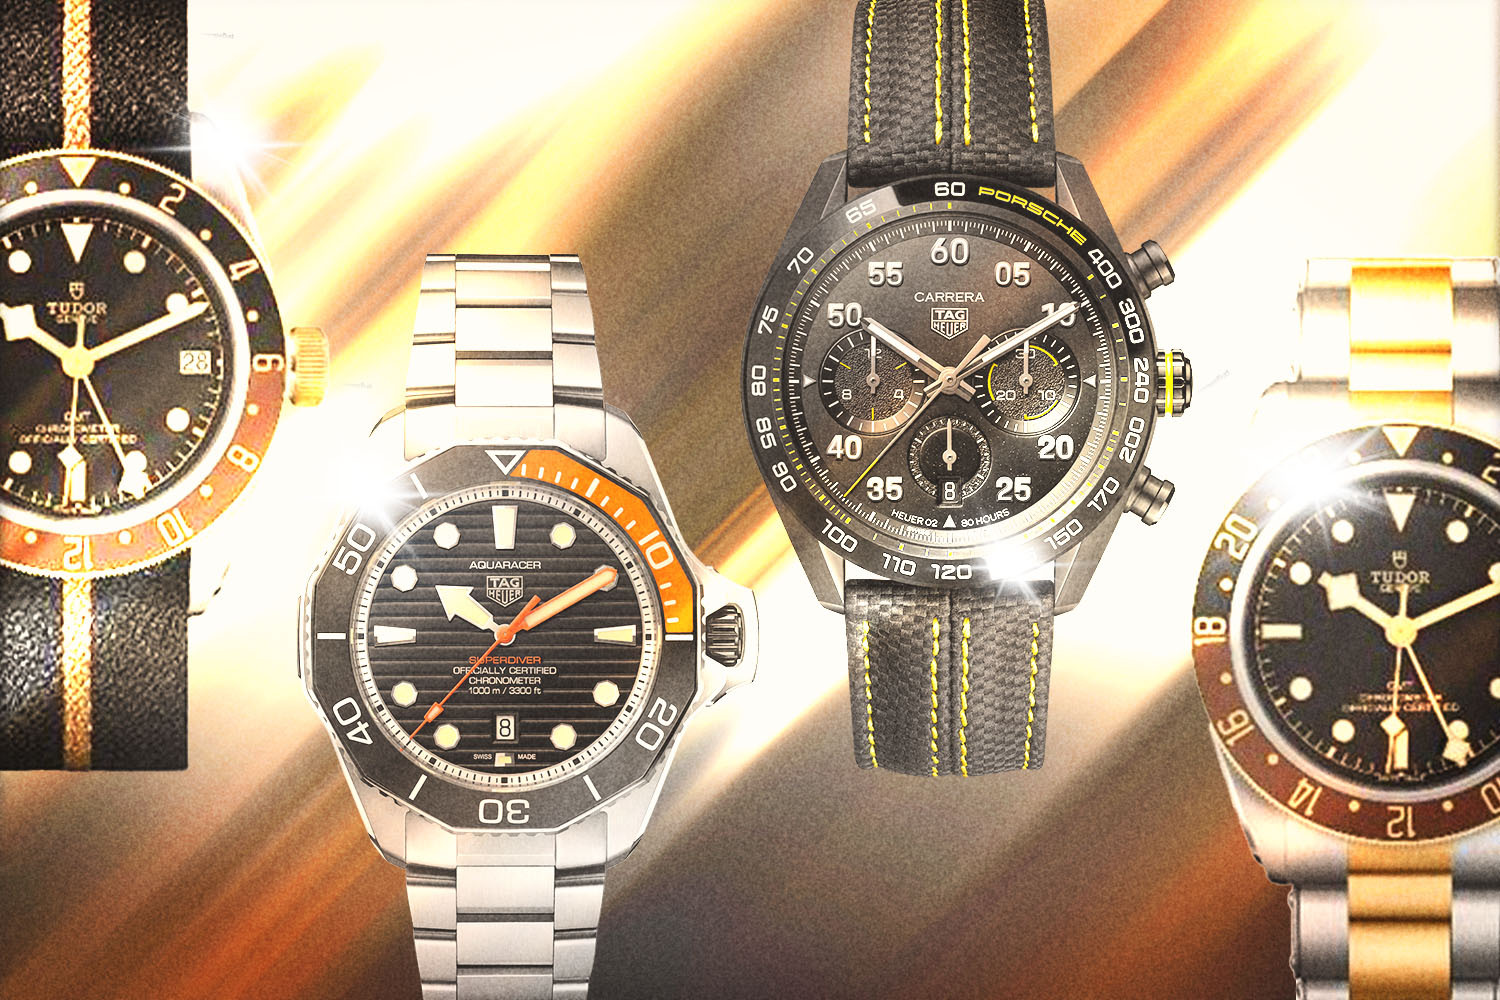 Tag Heuer, Tudor, Rolex watches from Watches & Wonders